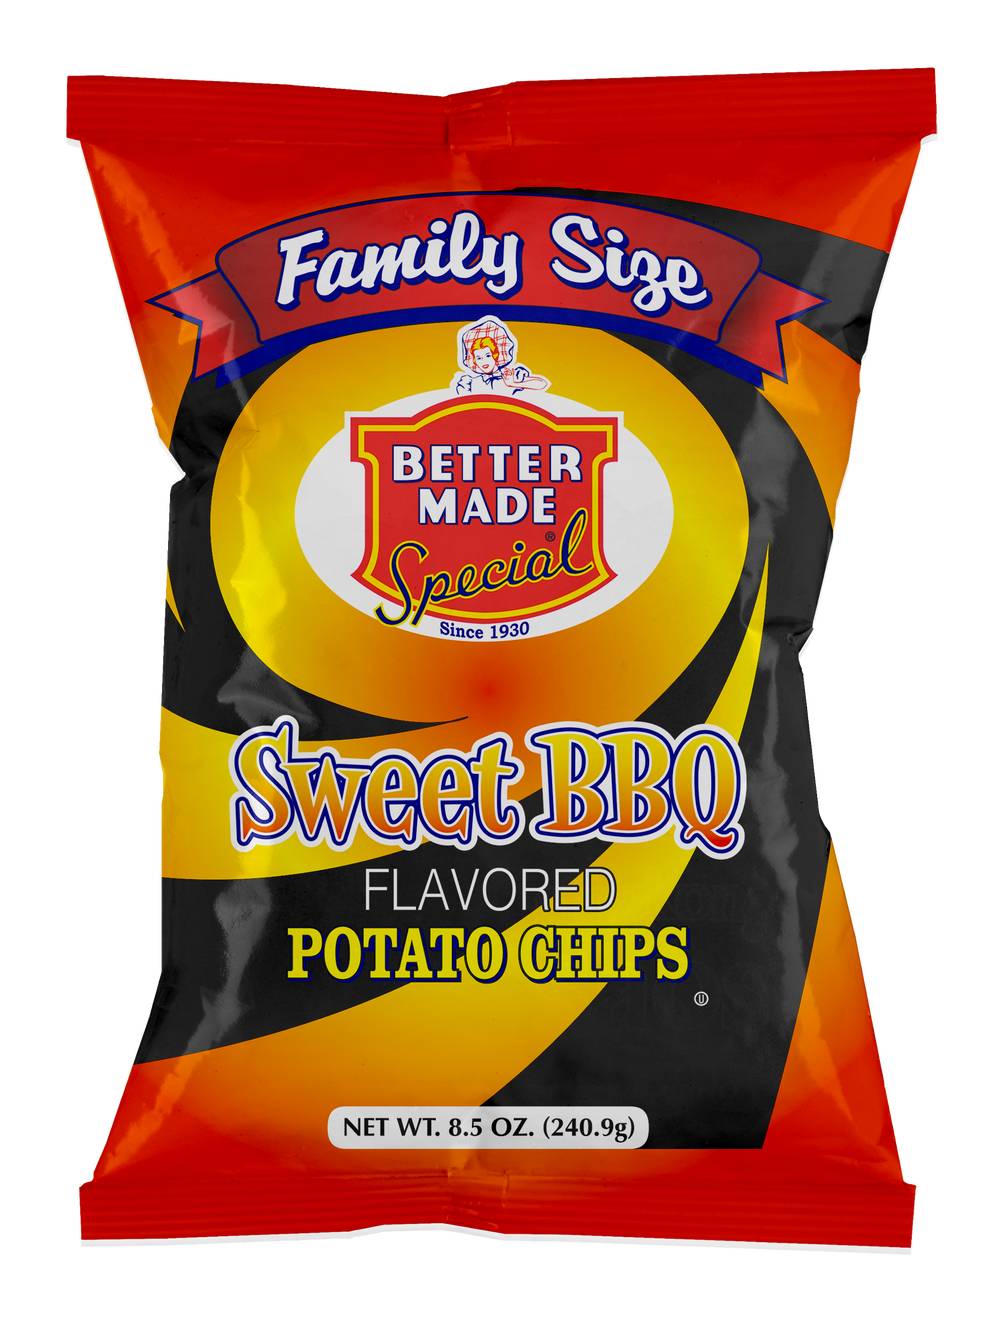 Better Made Special Potato Chips - Sweet Bbq, 8.5 oz